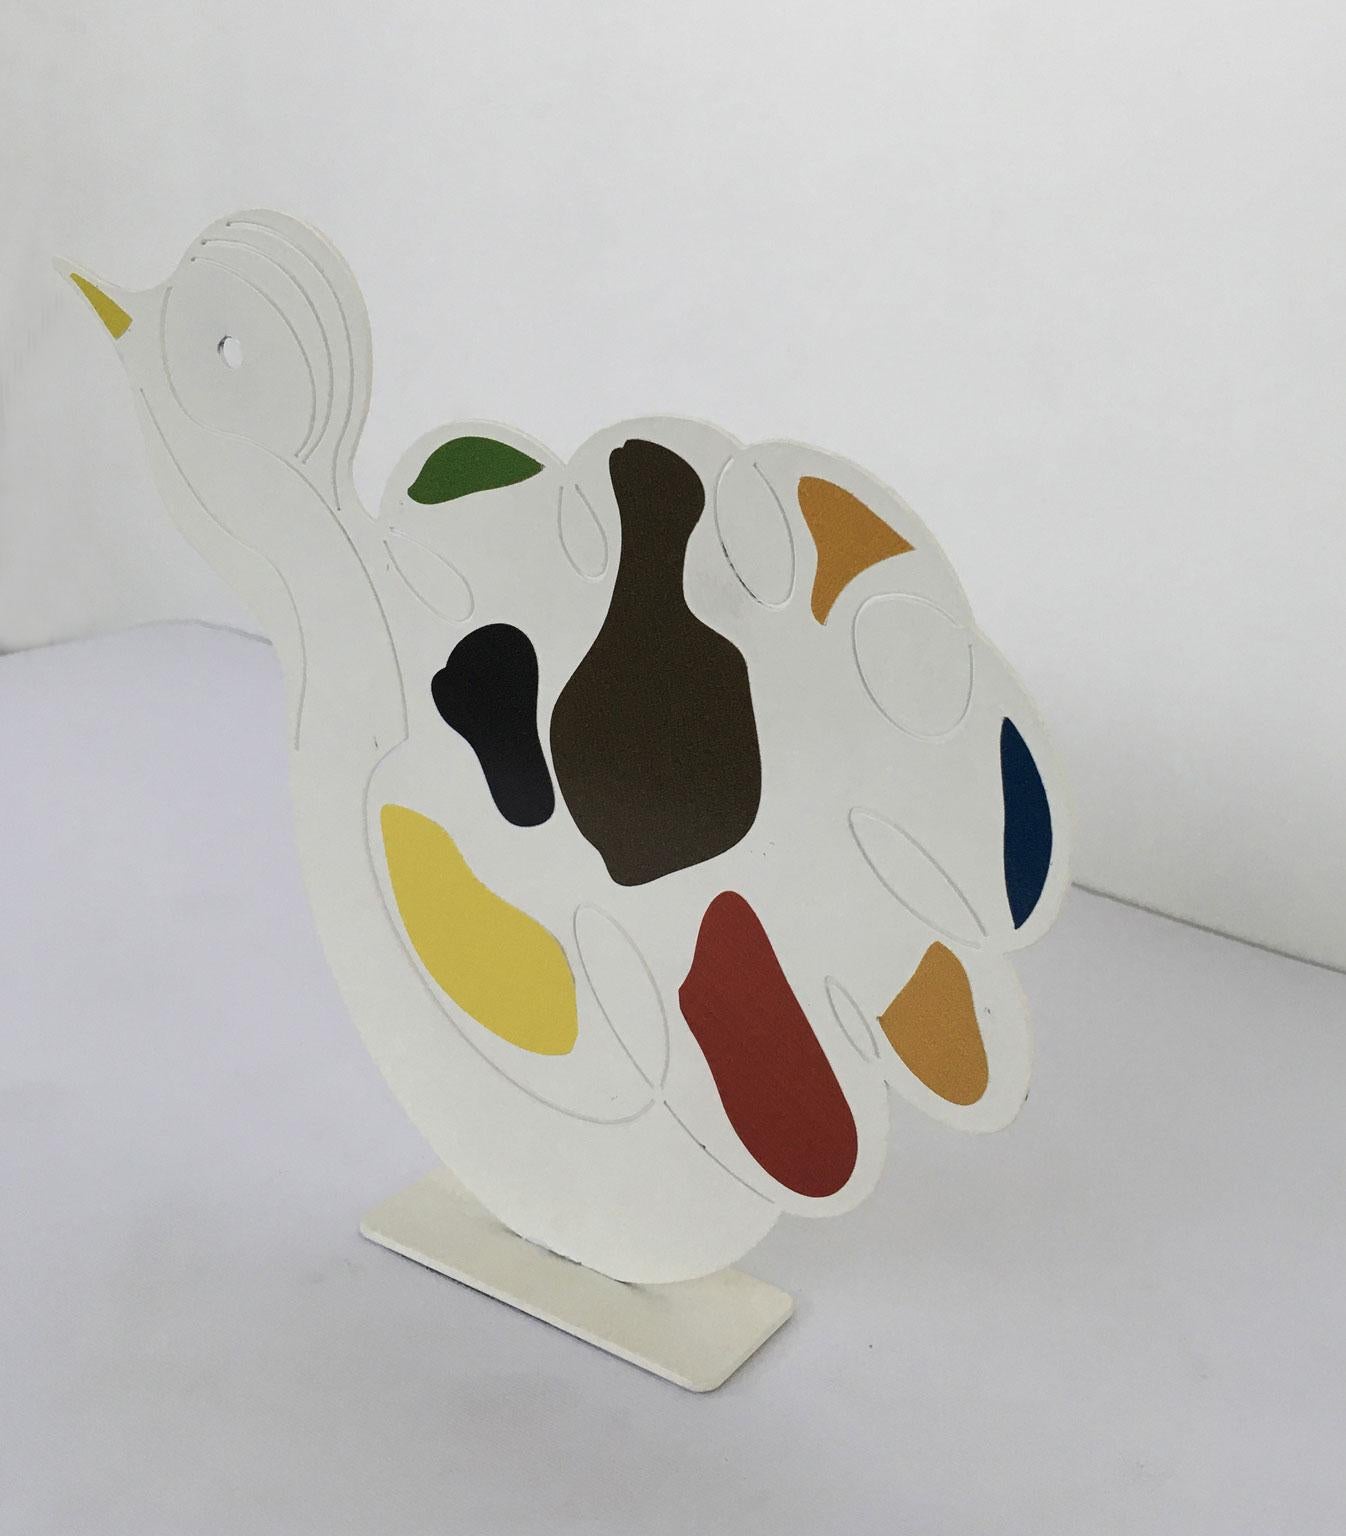 Italy 1980 Riccardo Dalisi White Painted Metal Sculpture Pulcinino For Sale 12